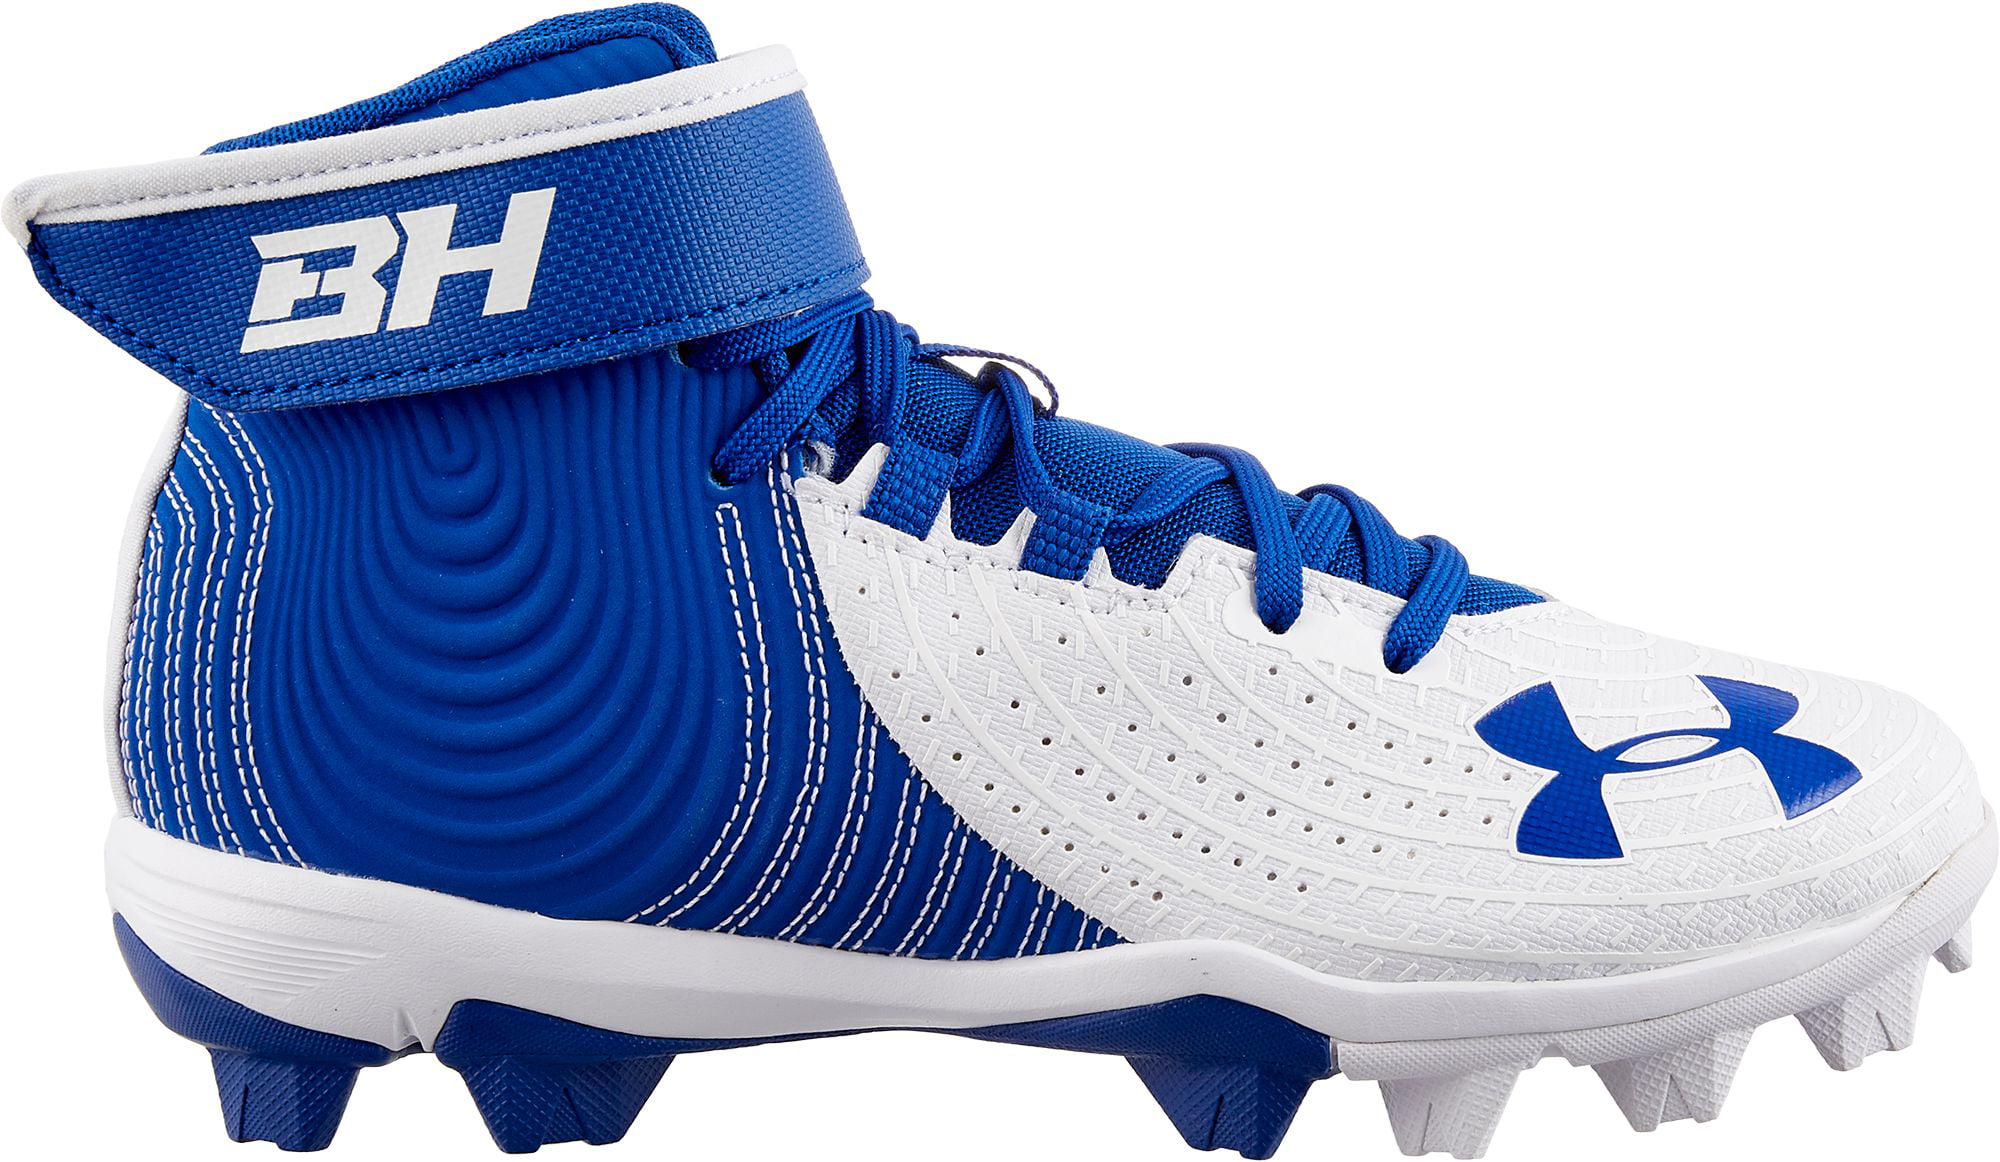 Under Armour Unisex-Child Harper 4 Mid Rm Jr Limited Edition Baseball Cleat 